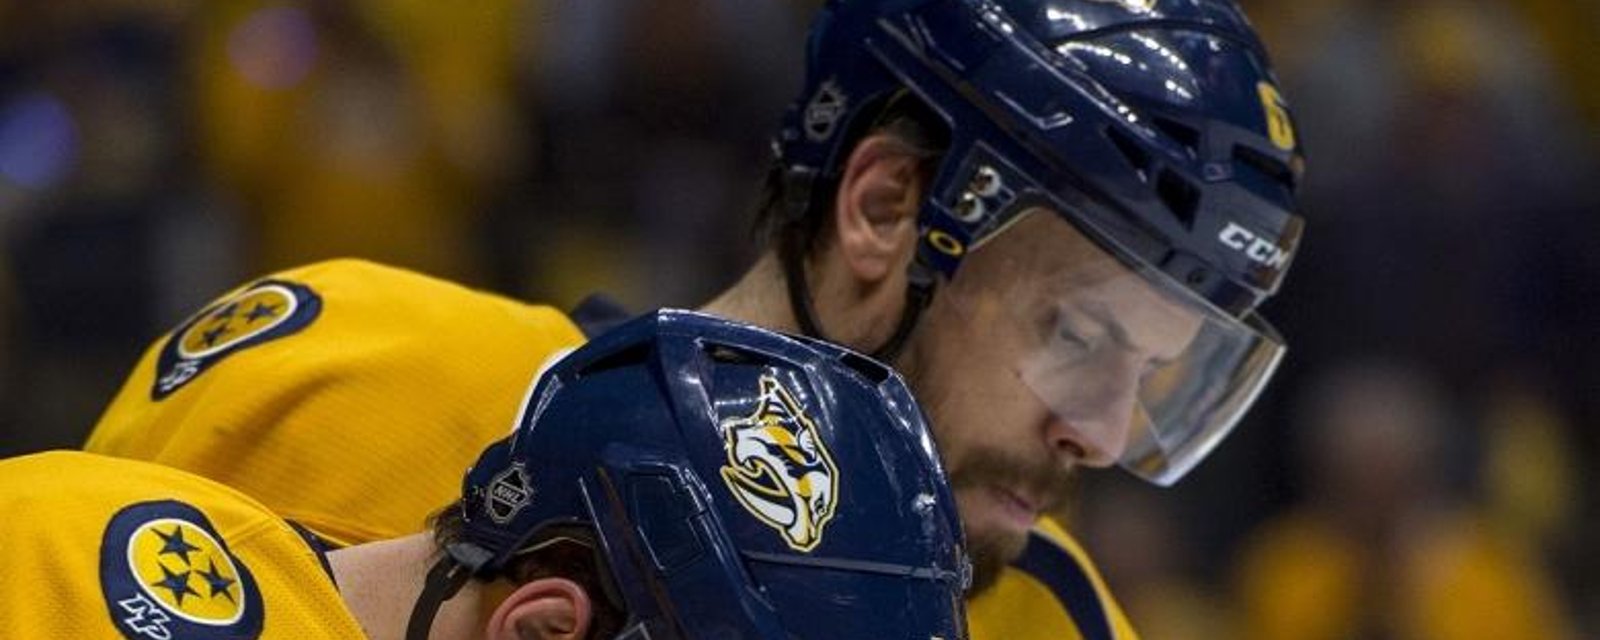 Analytics expert continue to weigh in on Shea Weber, and it's not good for Weber.